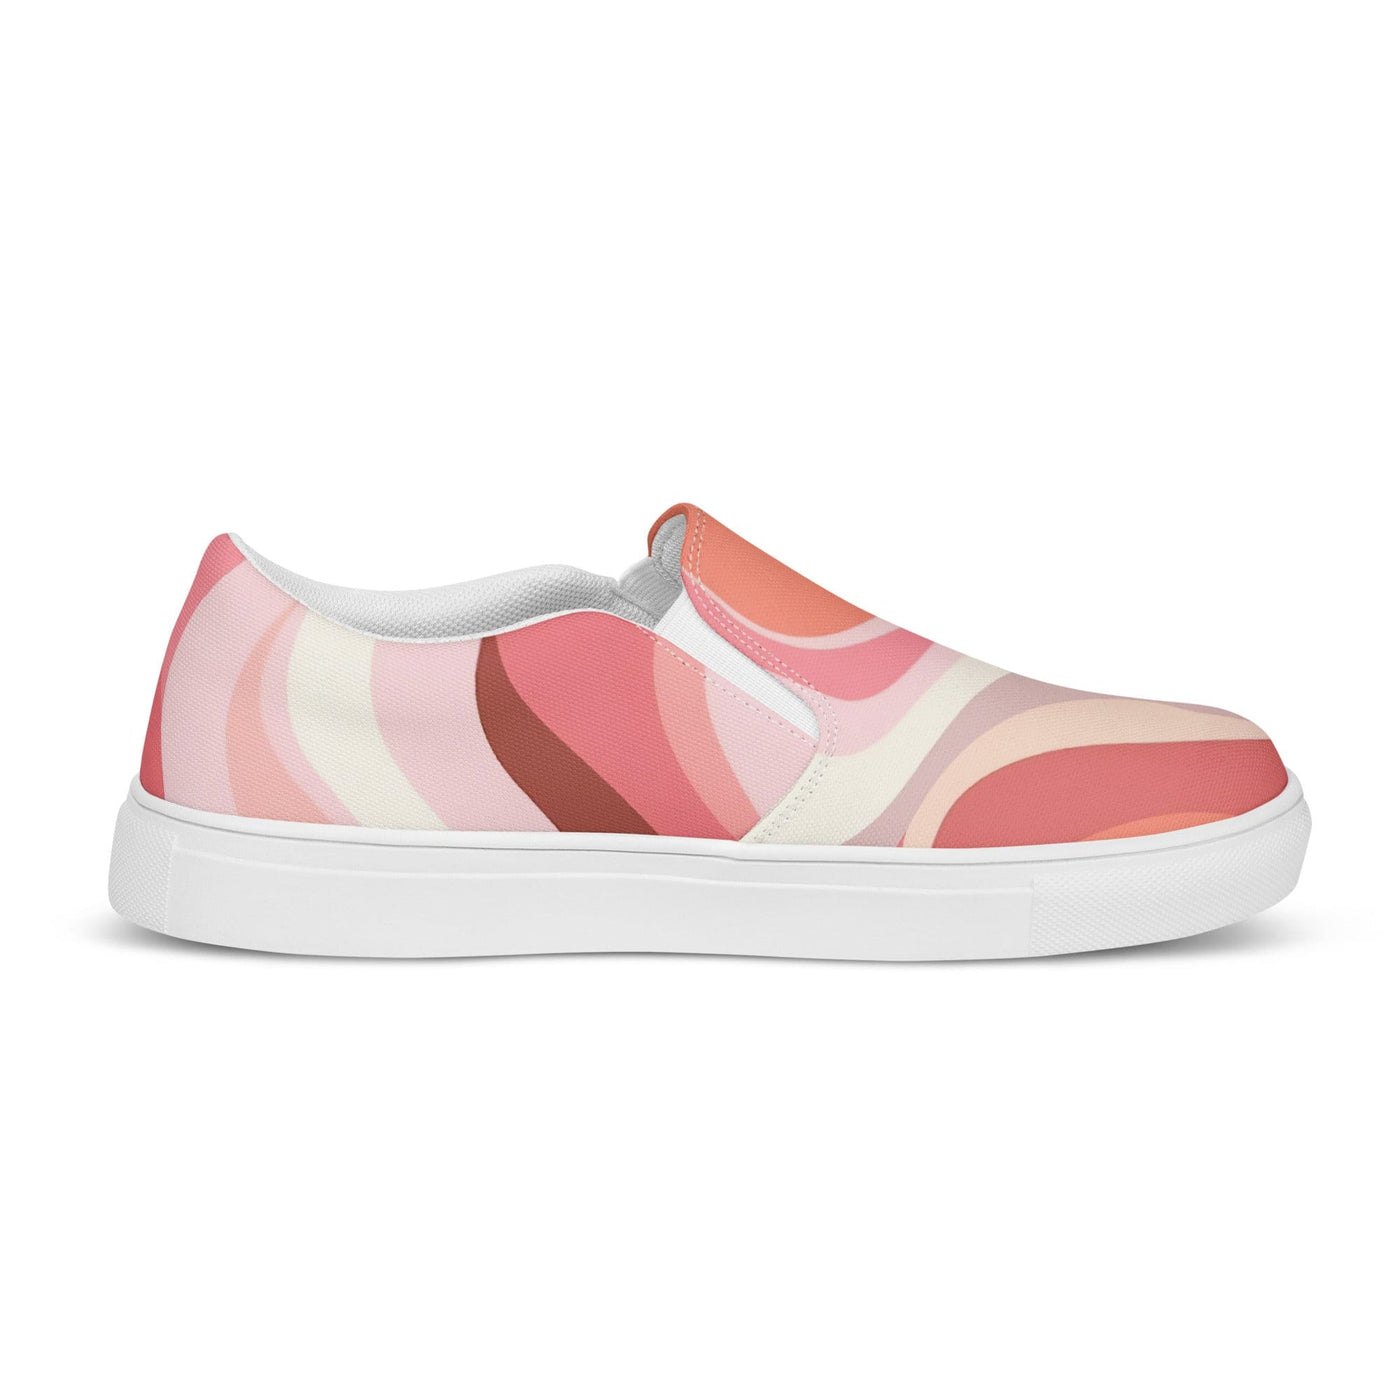 Women’s Slip-on Canvas Shoes Boho Pink And White Contemporary Art - Womens